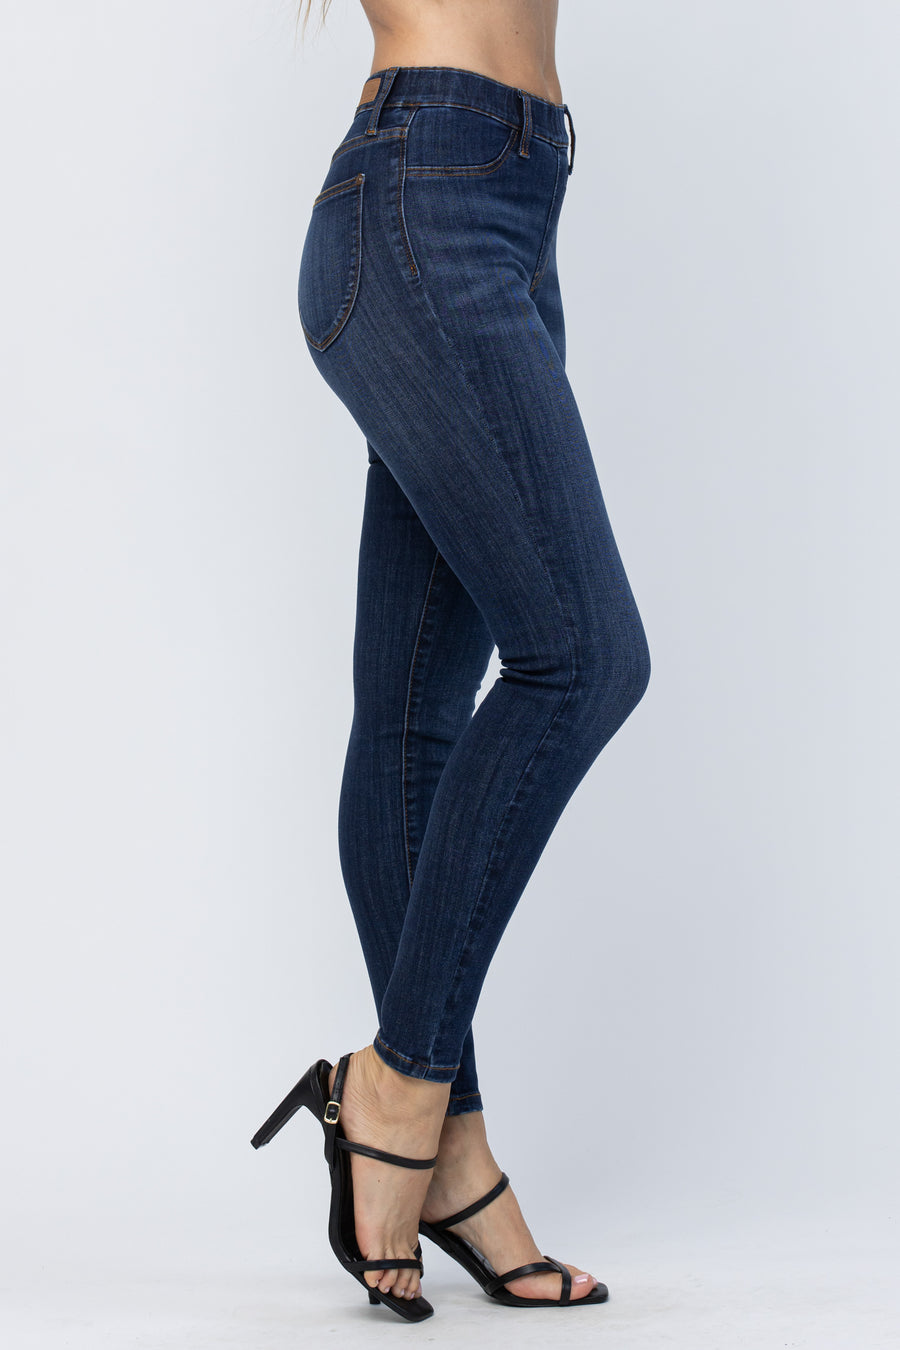 Sue Patch Pocket Pull-On Skinny